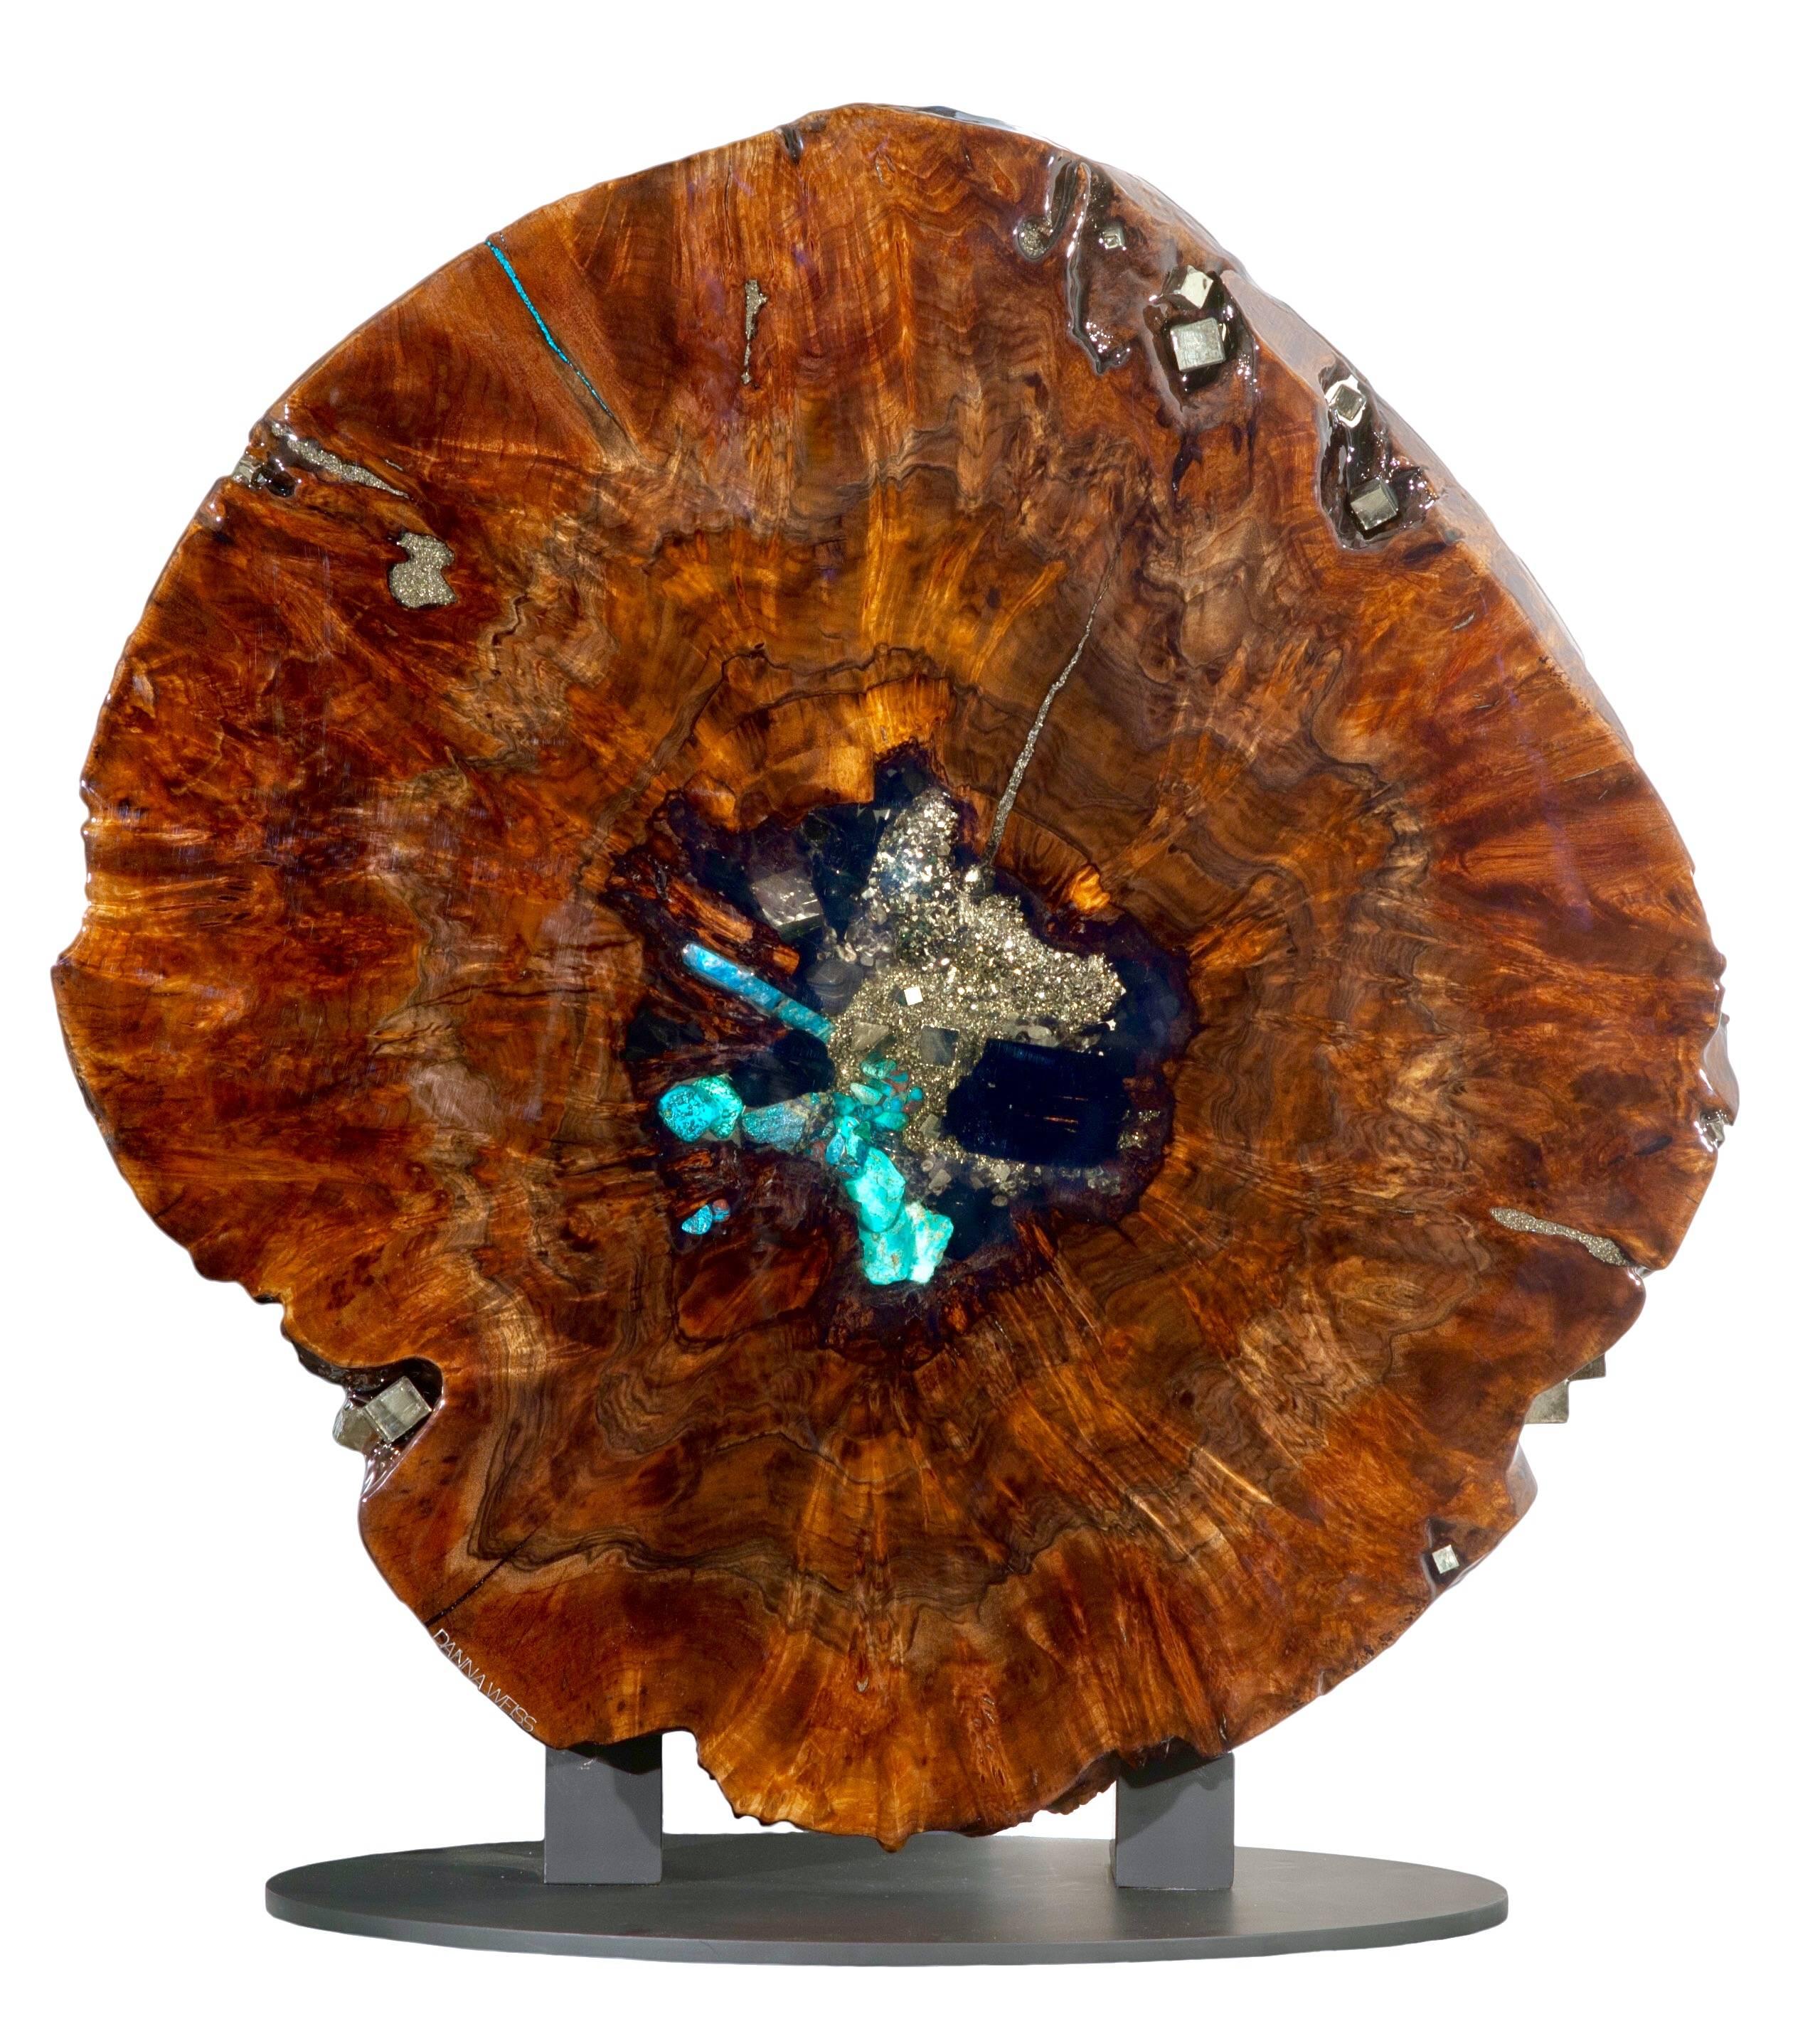 Wall-mounted Caro Walnut sculpture with crystal and gemstone inlay. Stone contents include black tourmaline and turquoise. See Danna Weiss store.  